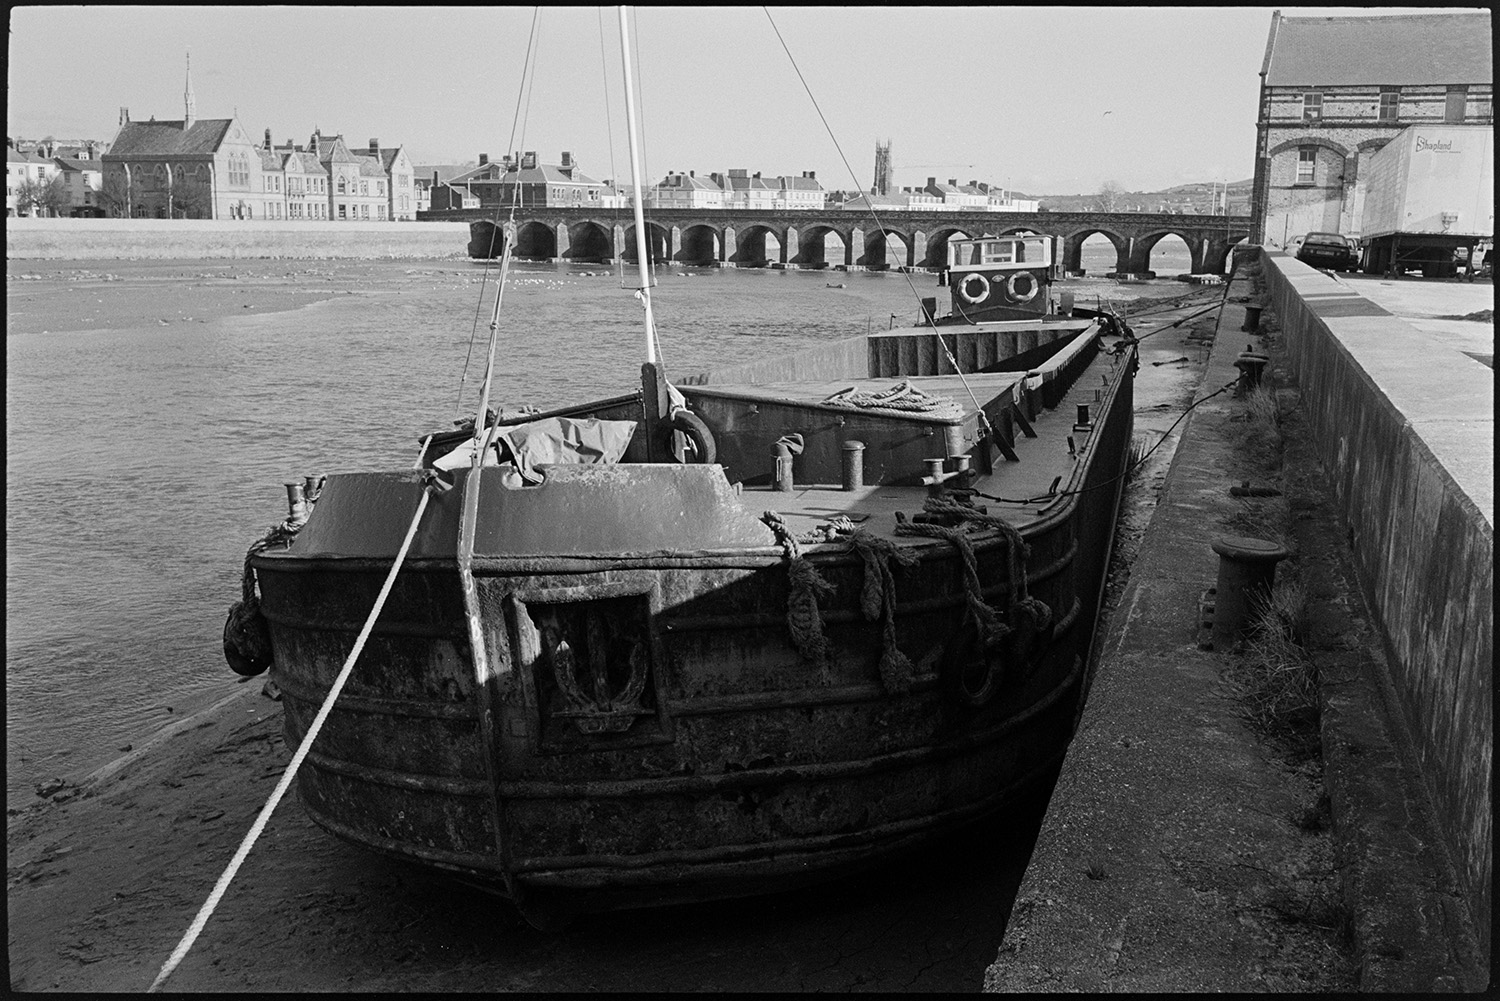 Barges and small boats on river bridge in background.
[A barge moored along the banks of the River Taw at Barnstaple. Barnstaple bridge and buildings along the river front can be seen in the background.]